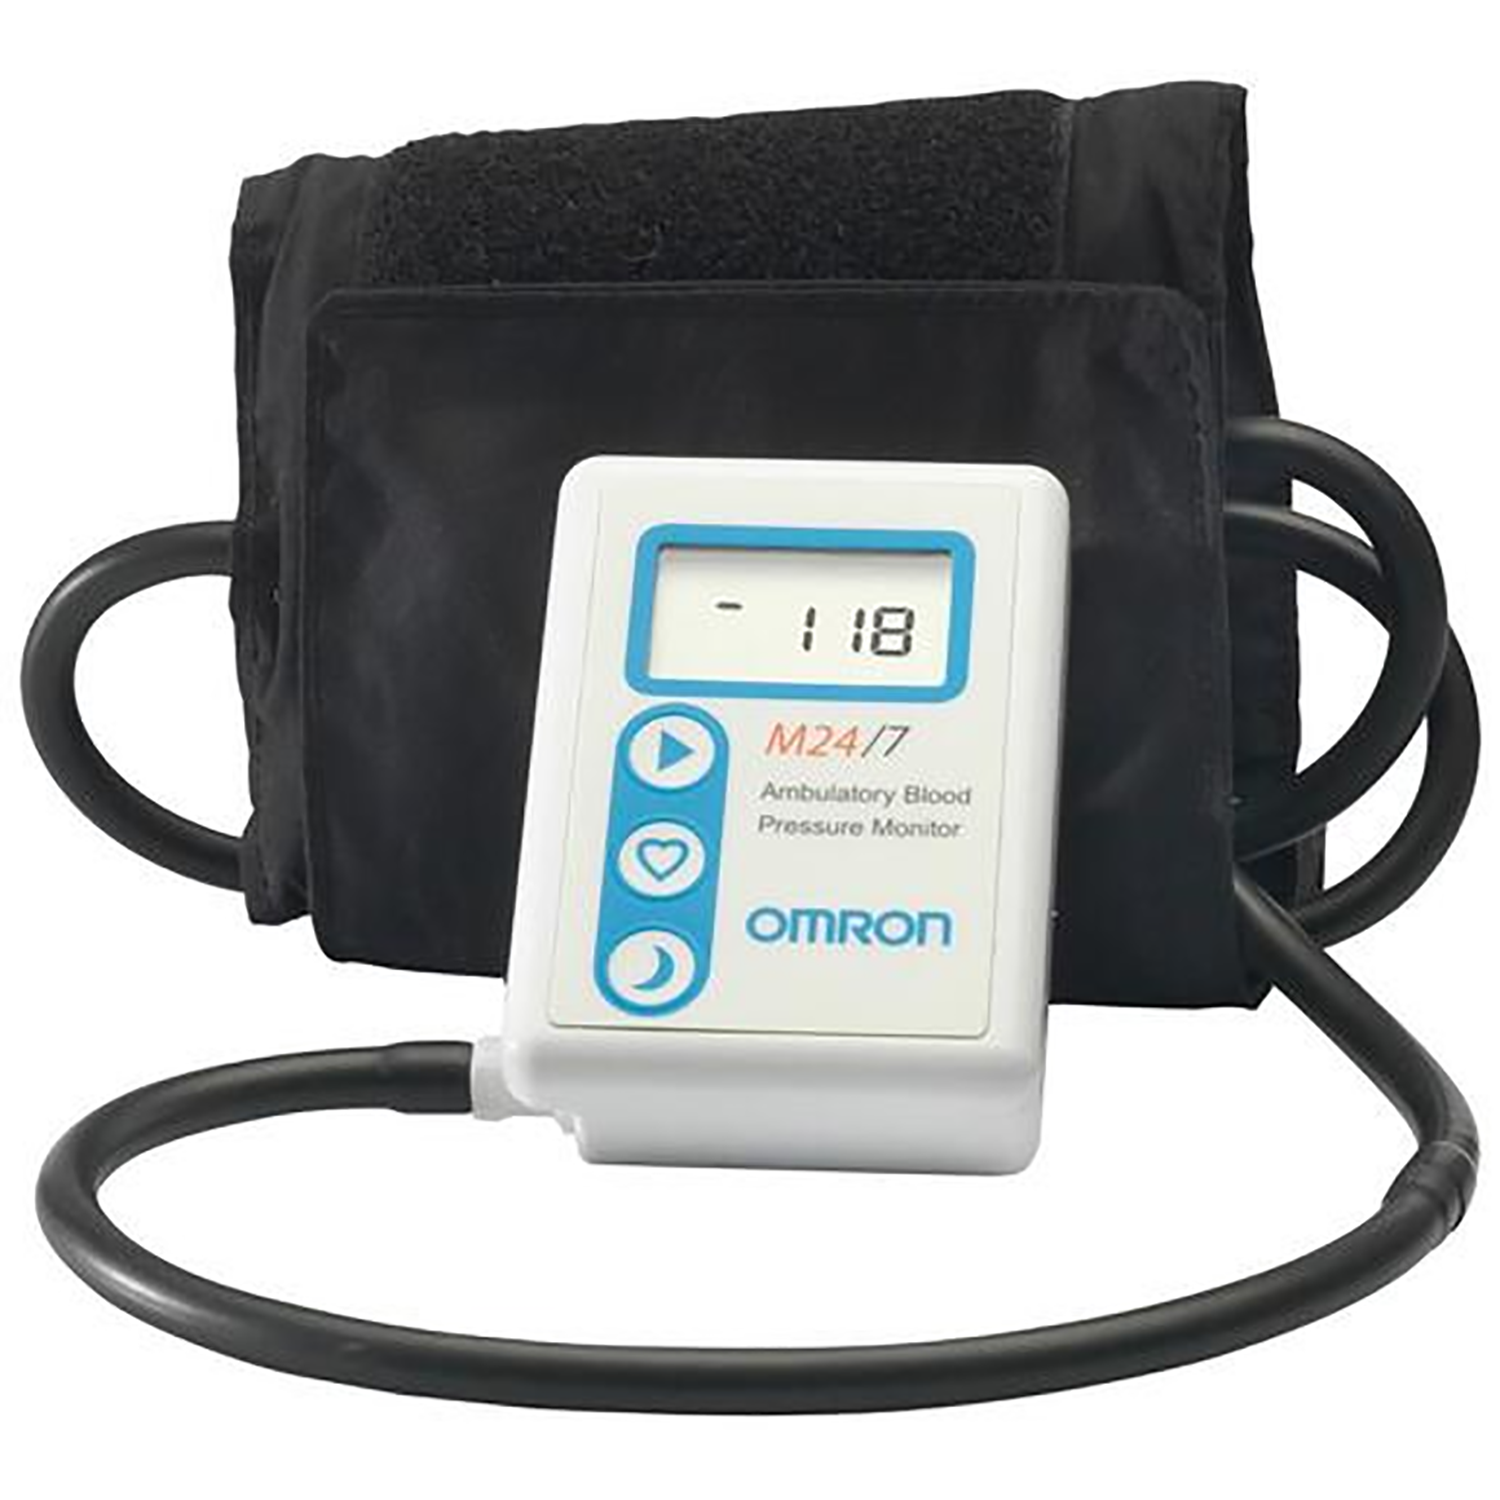 Omron M24/7 Normal Sleeve